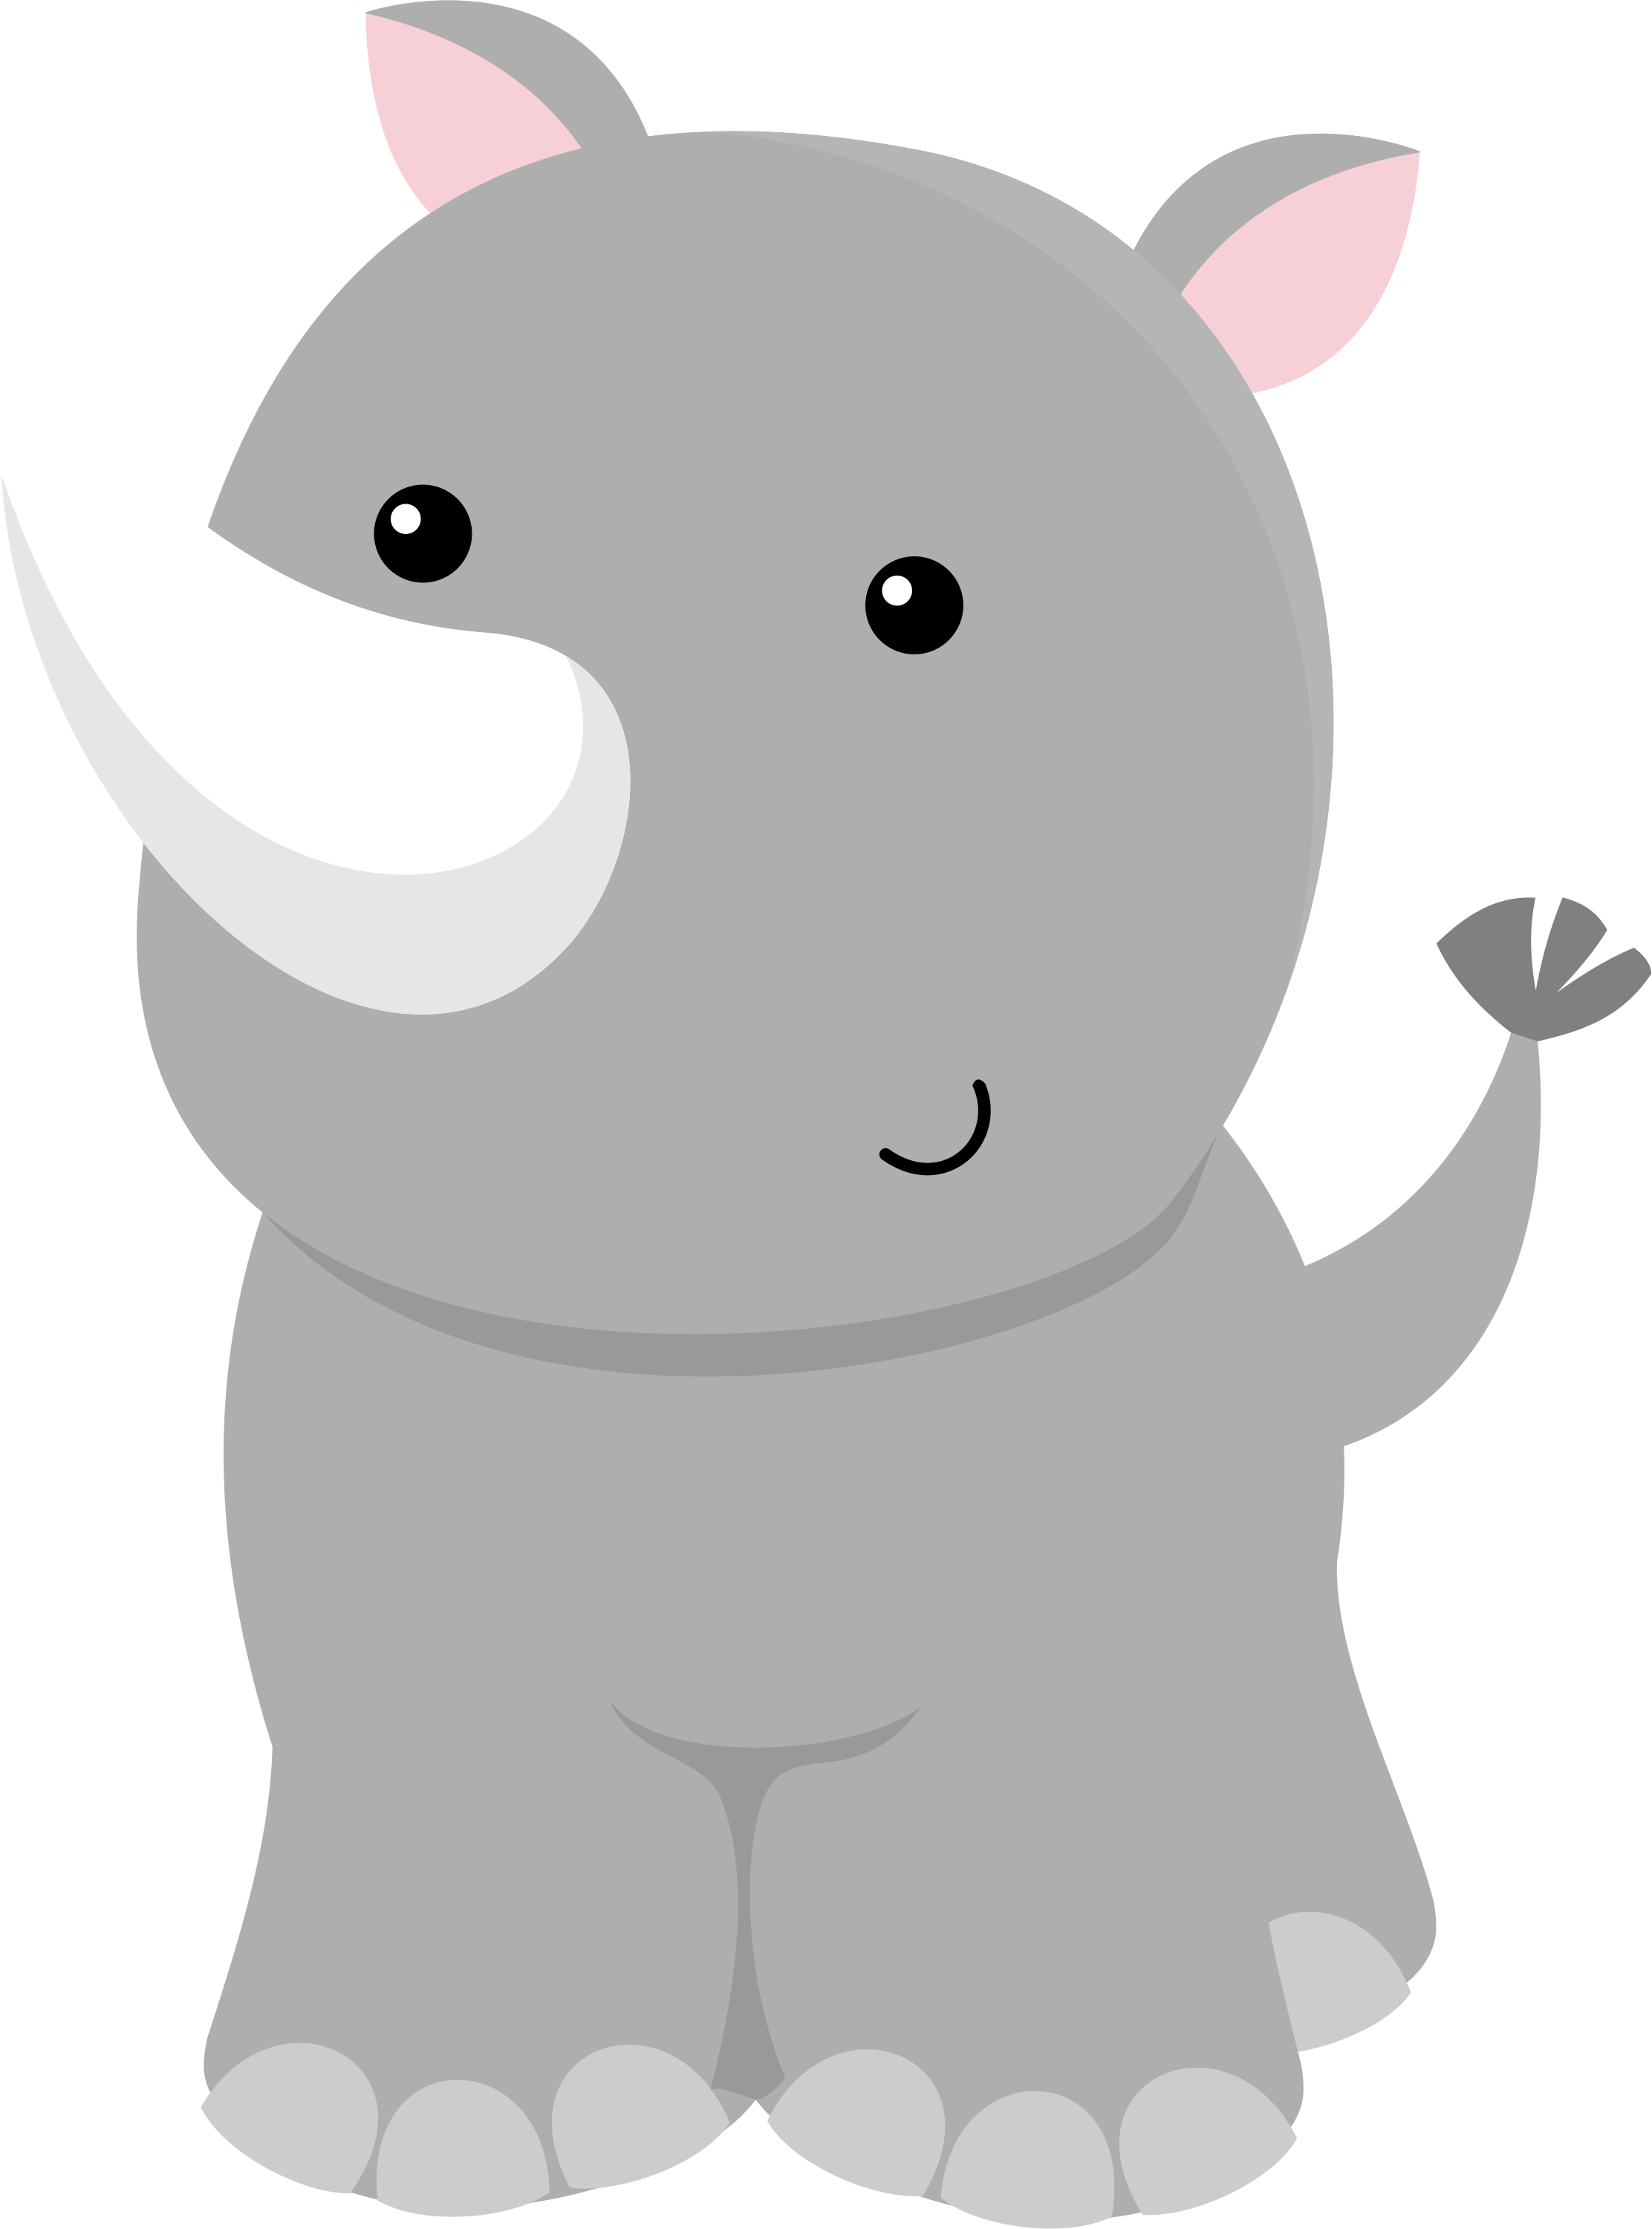 Hippo clipart baby shower. Pin by jennifer simpson